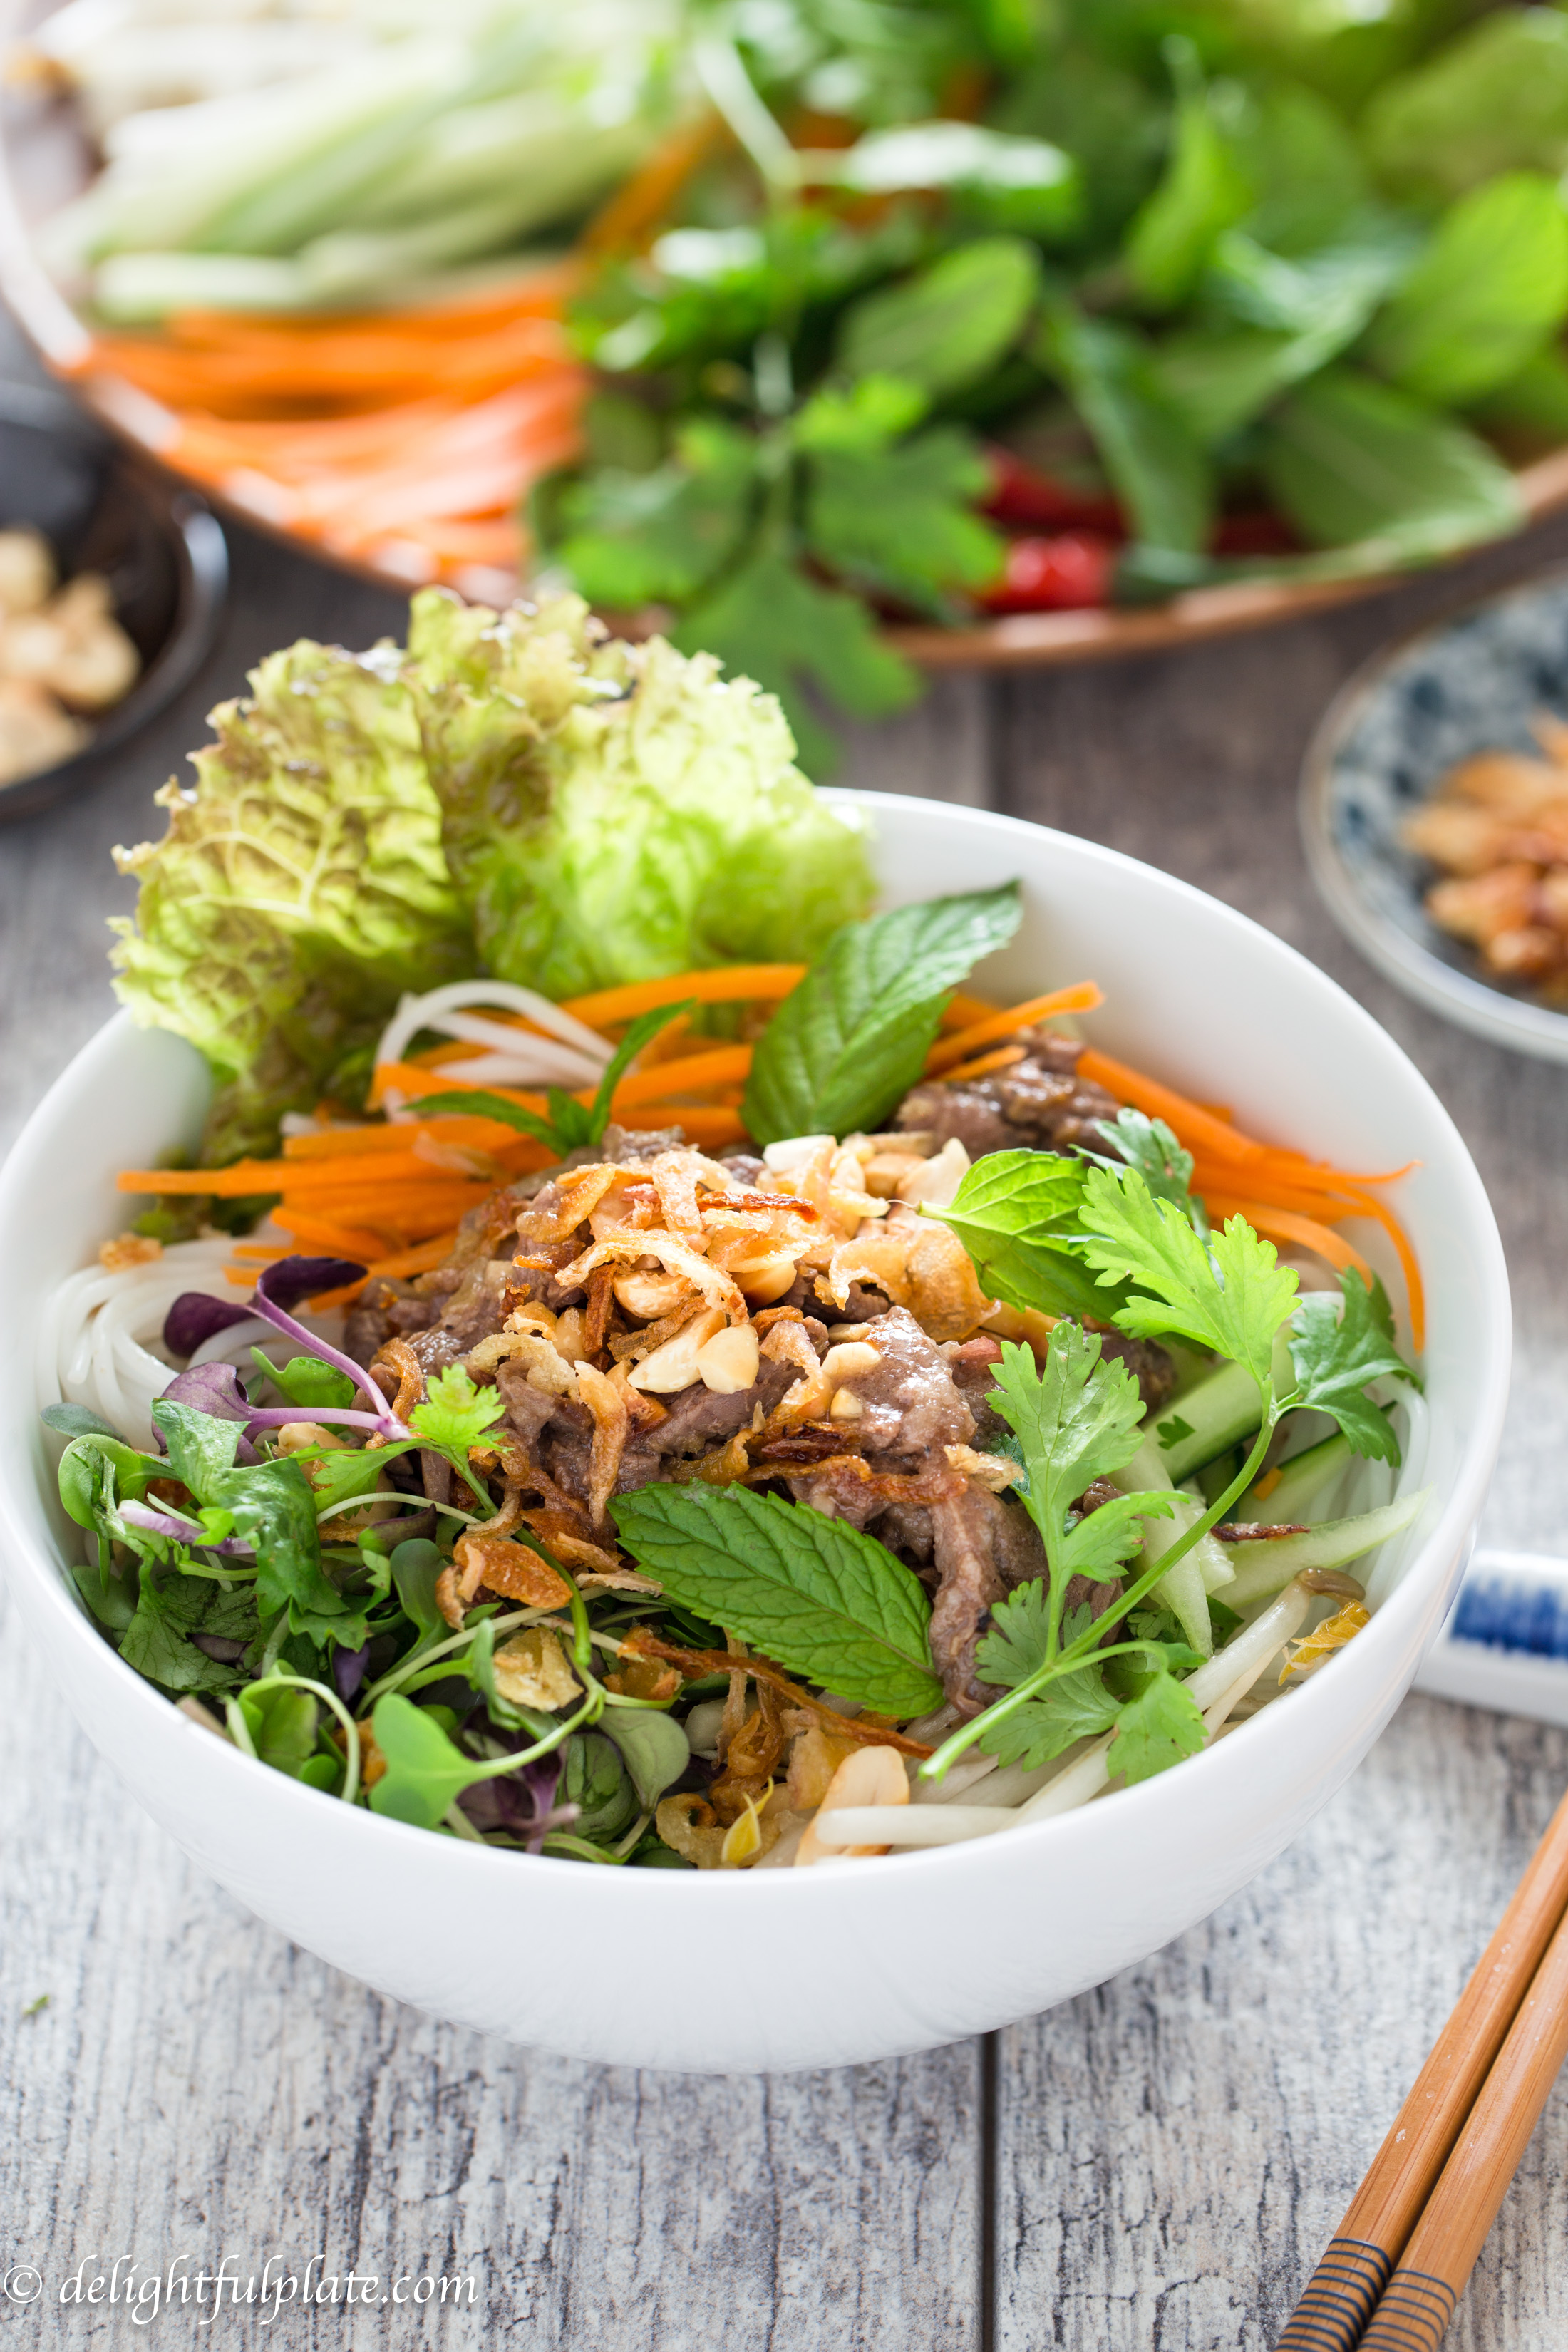 Vietnamese Beef Noodle Salad (Bun Bo Xao) is packed with crunchy veggies, refreshing herbs and flavorful beef. This healthy dish is quick and easy to make and can be either a main a side dish.